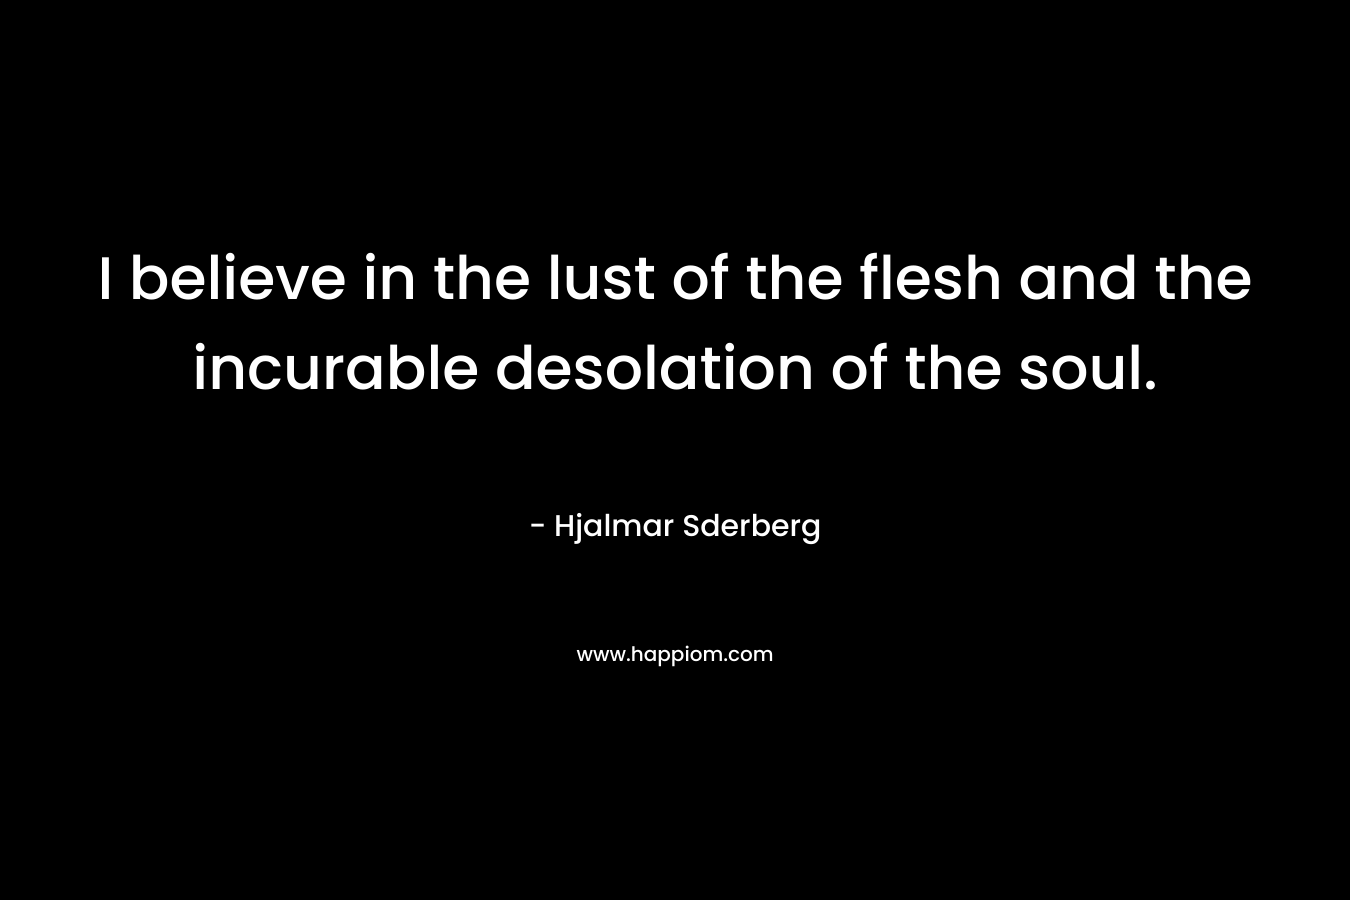 I believe in the lust of the flesh and the incurable desolation of the soul. – Hjalmar Sderberg